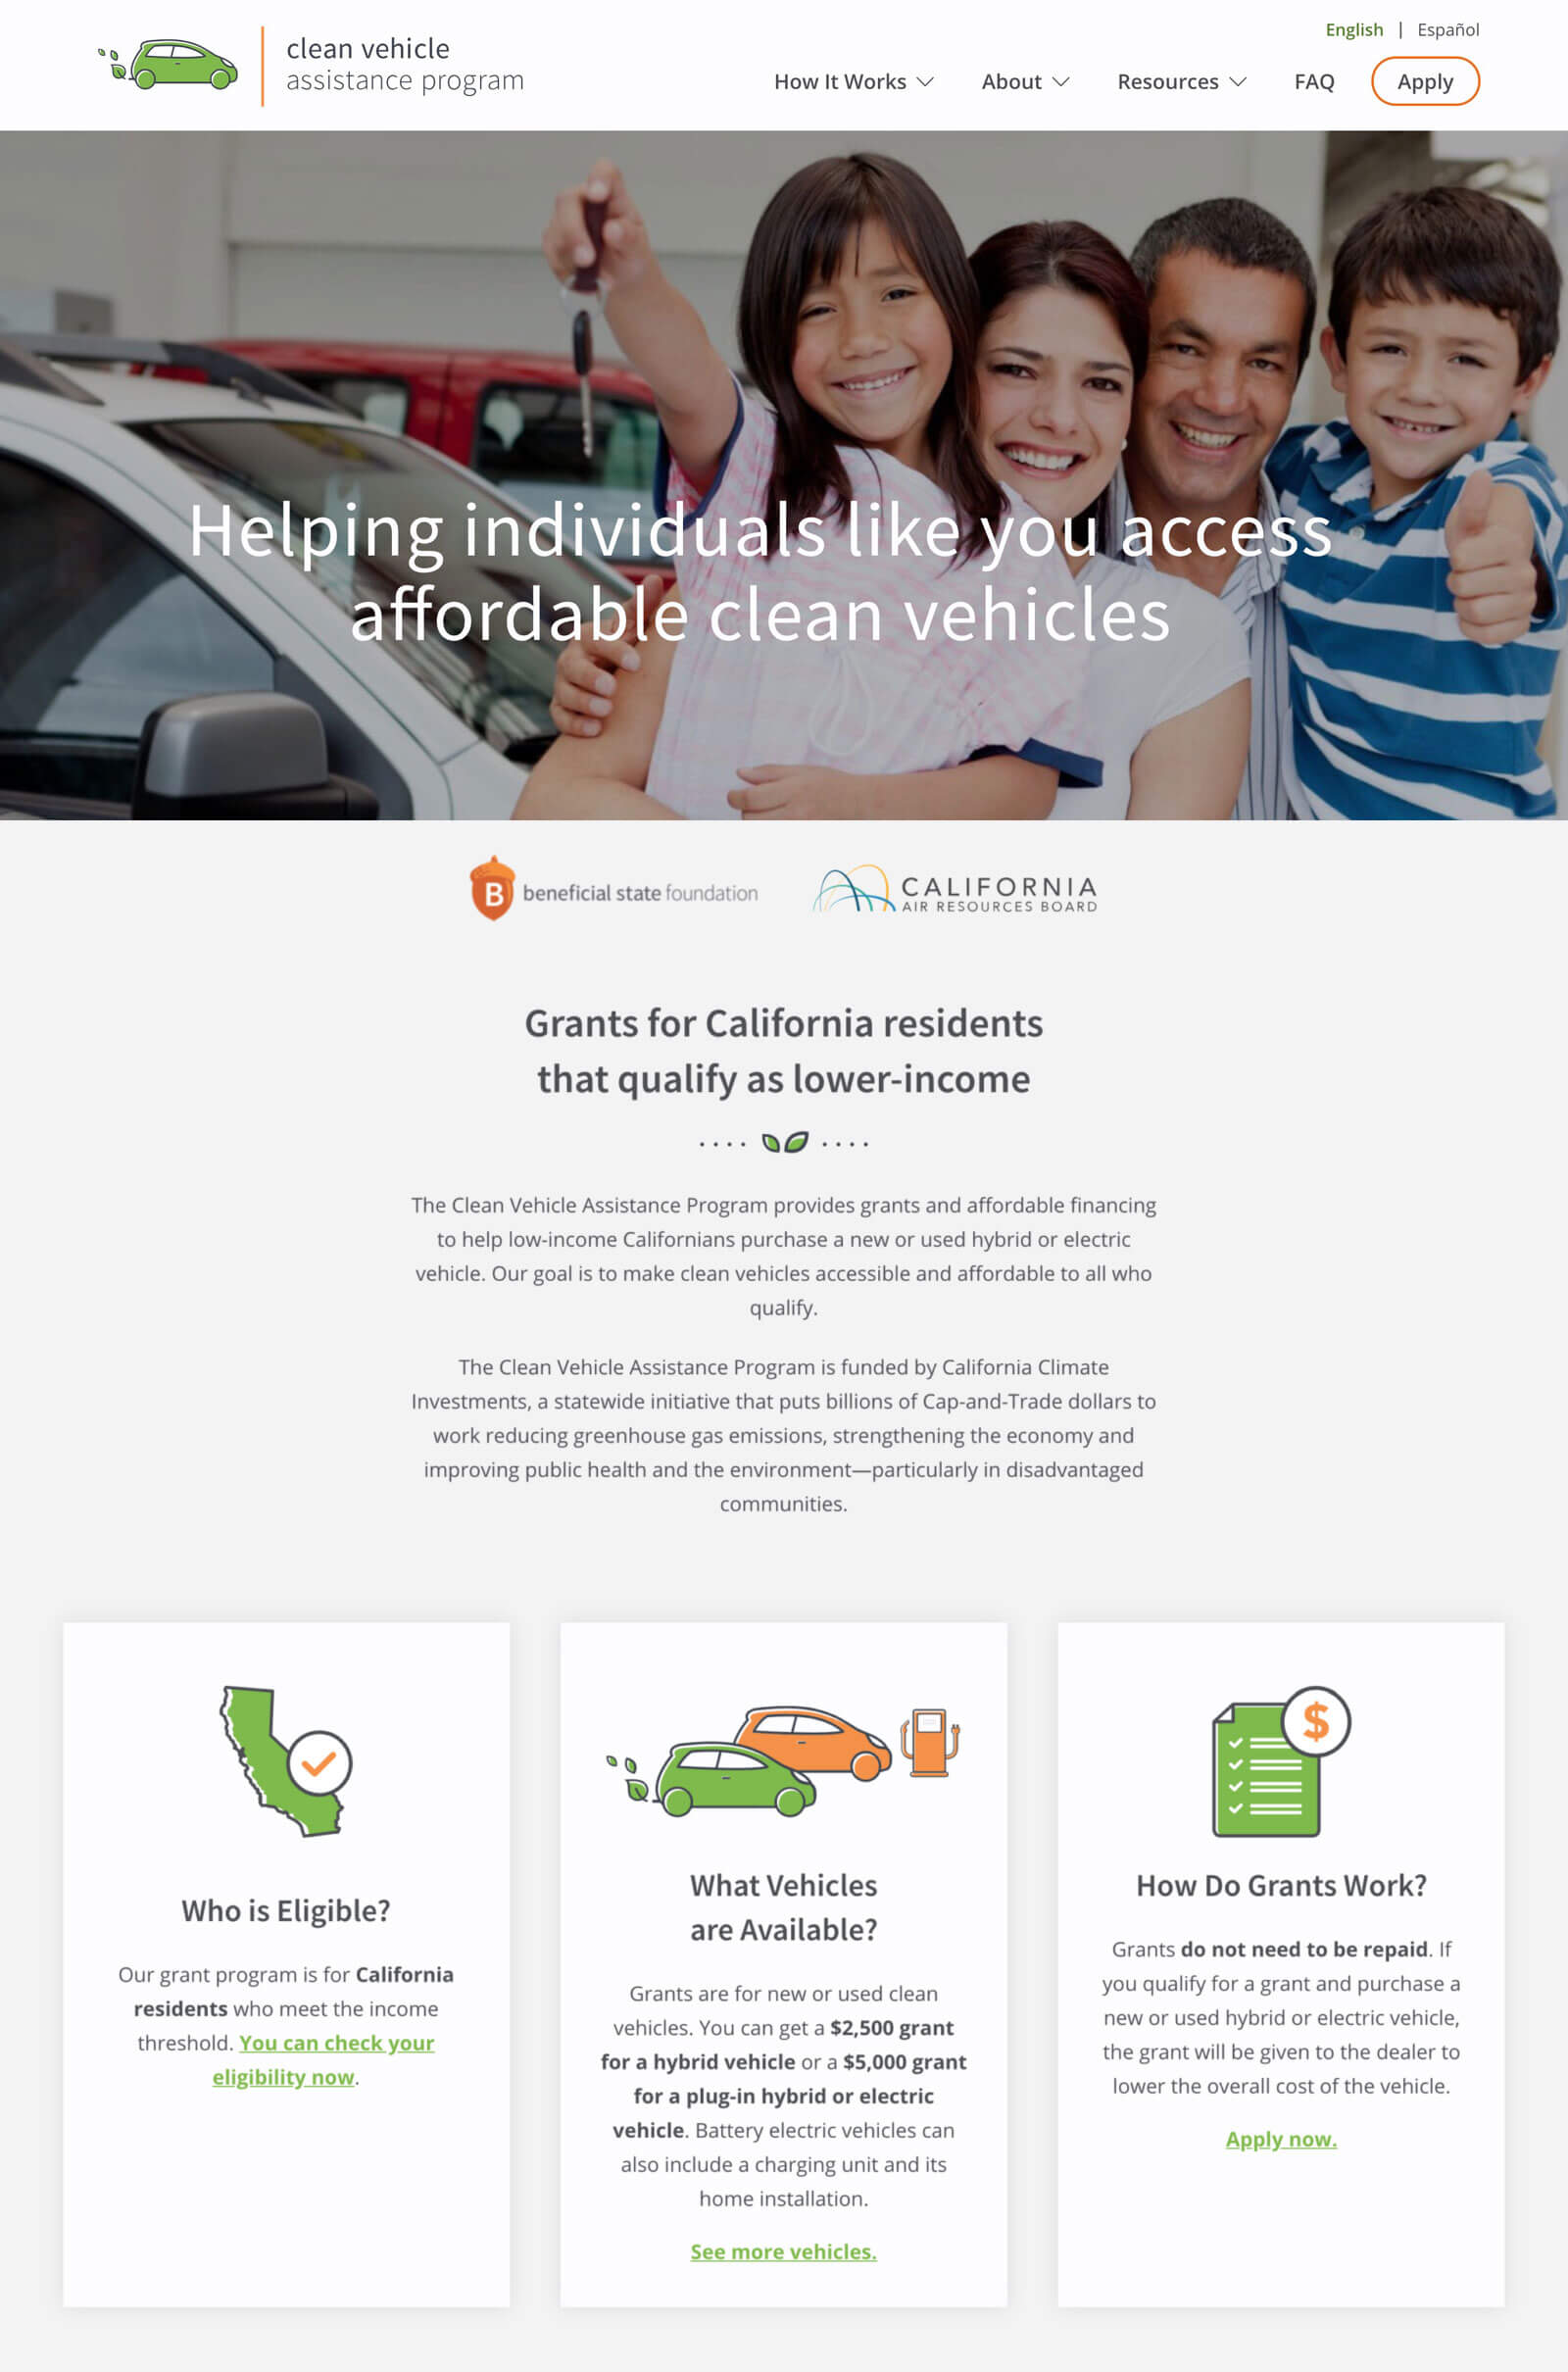 A page from Clean Vehicle Assistance Program website showing a happy family of four and information